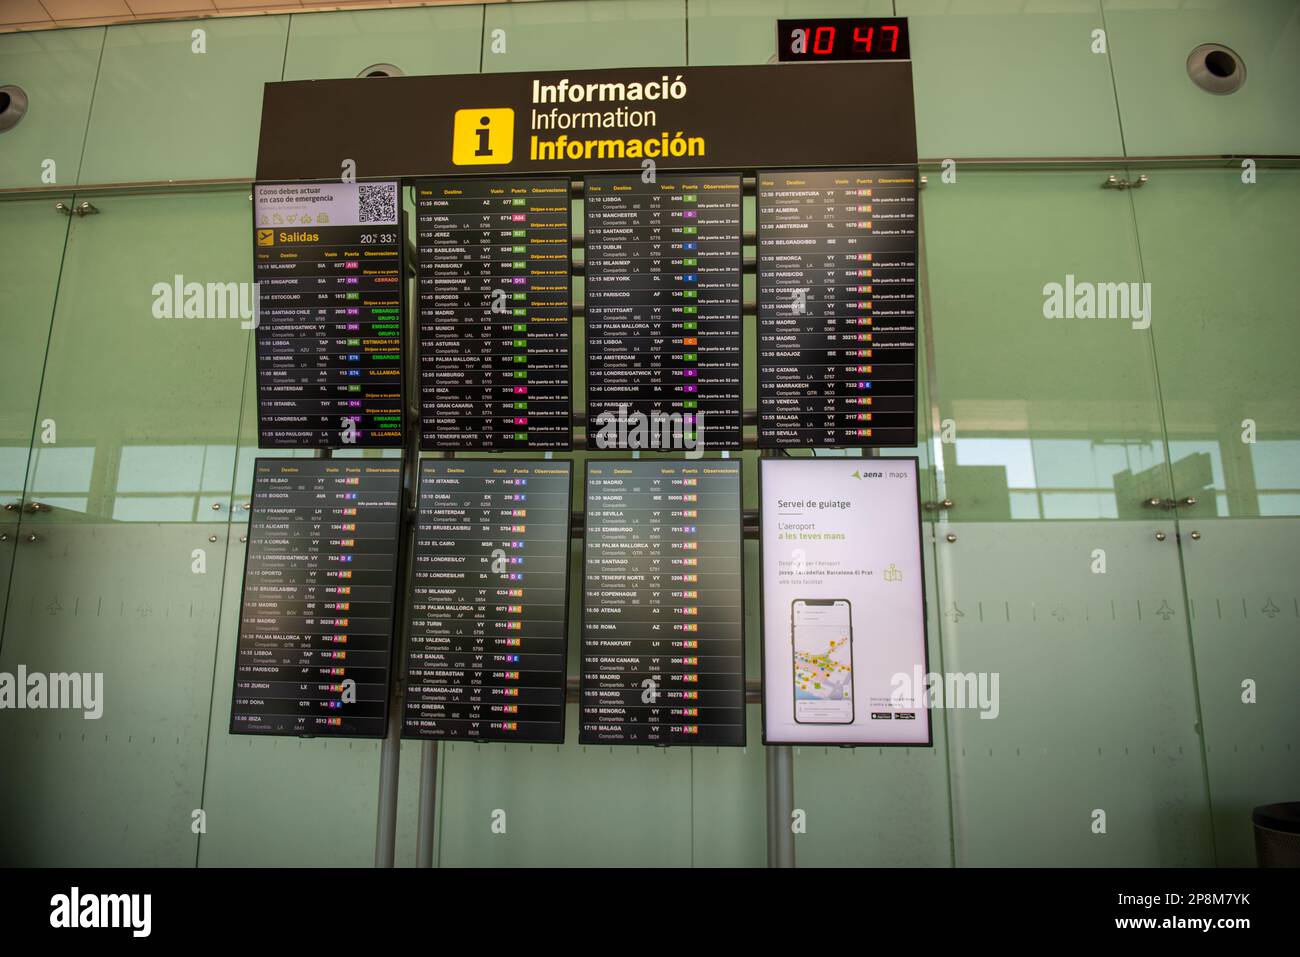 Barcelona,Spain- February 24,2023:View of flight departure board indicating boarding time and gate for different flights. Stock Photo